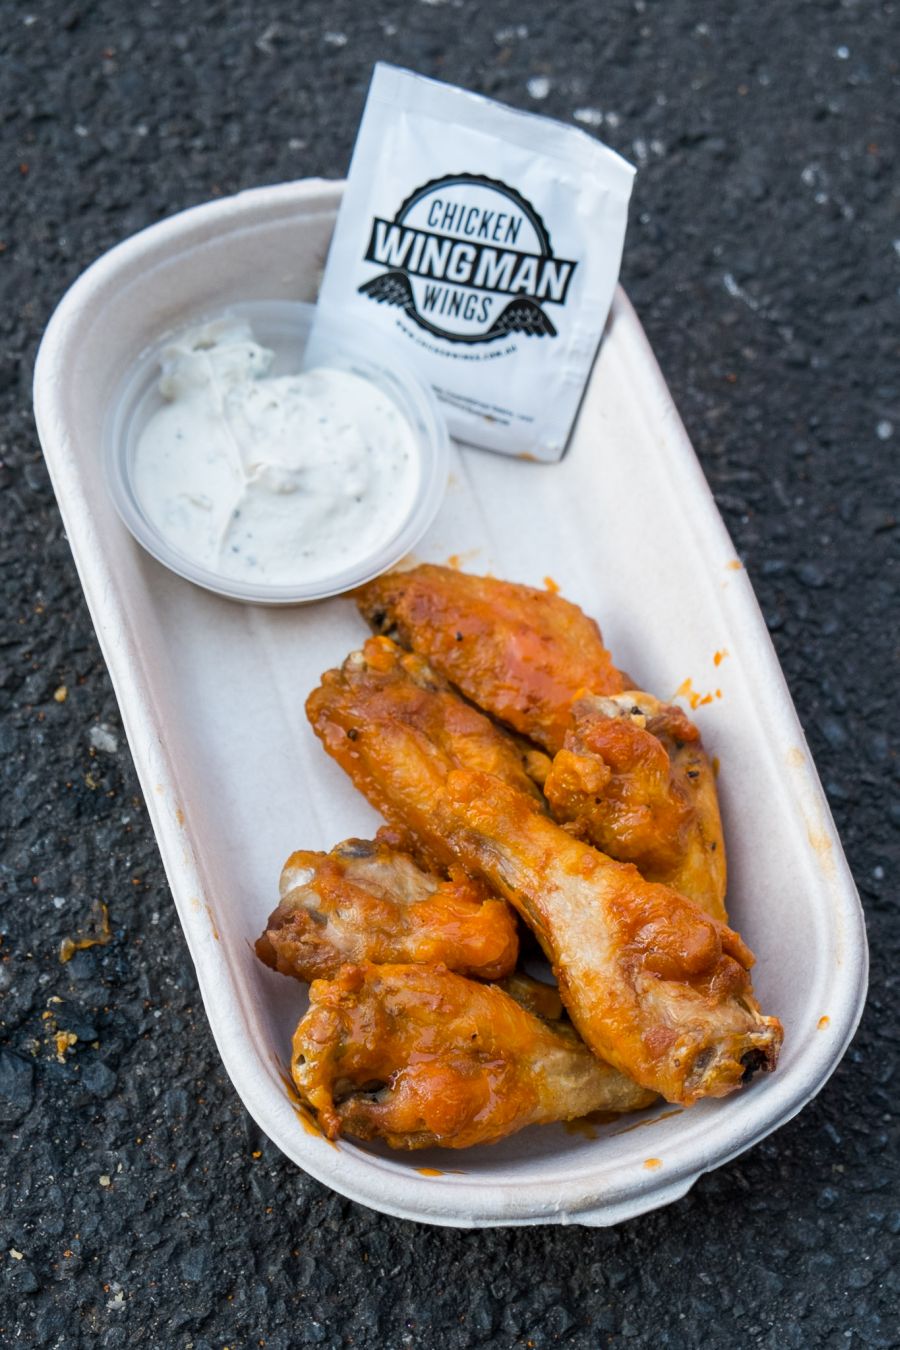 Wing Man chicken wings with blue cheese dip